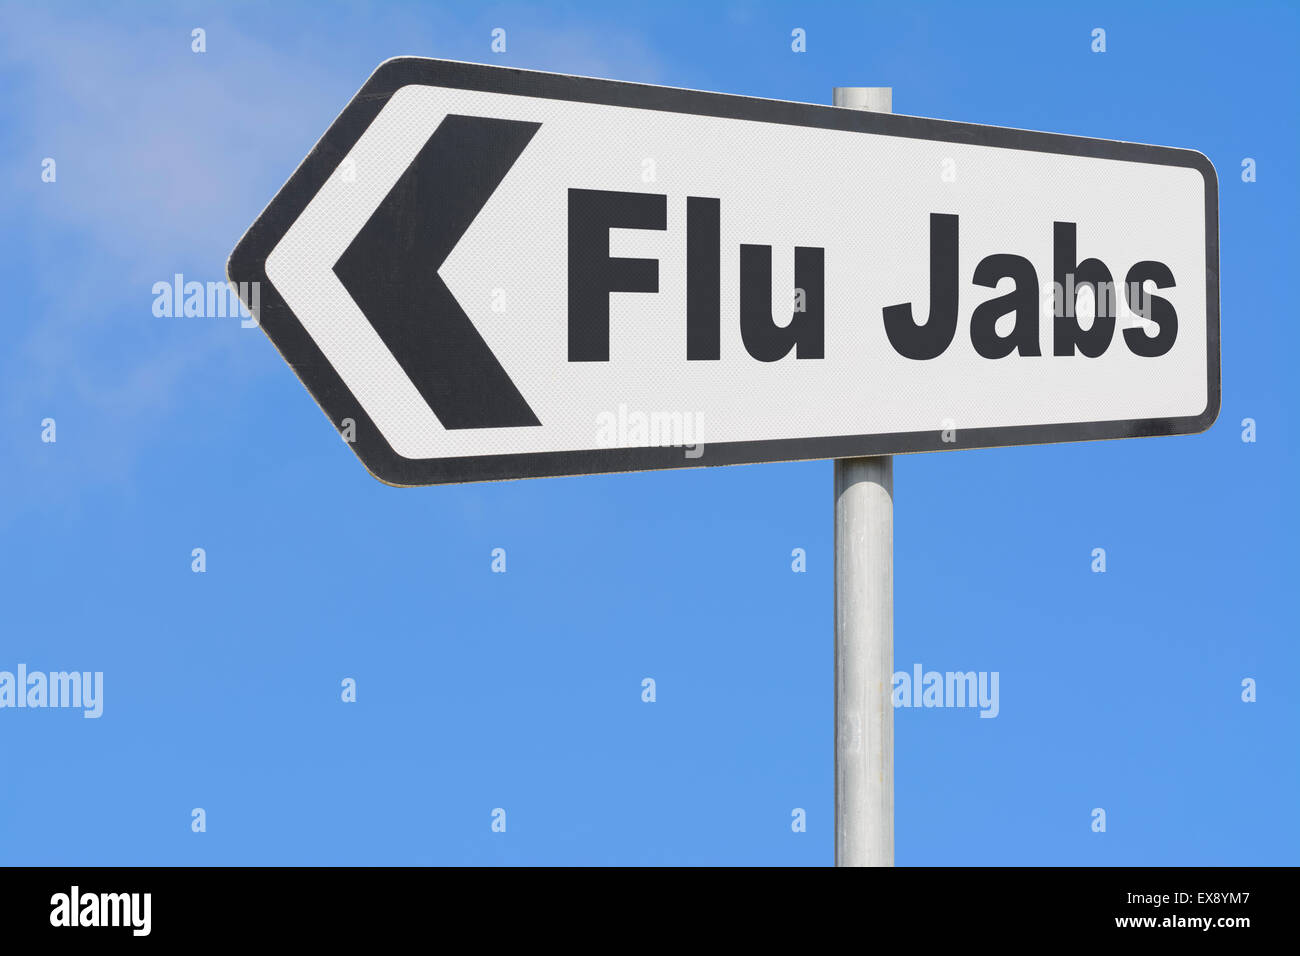 Flu Jabs sign pointing to where to get vaccinated against catching influenza. Stock Photo